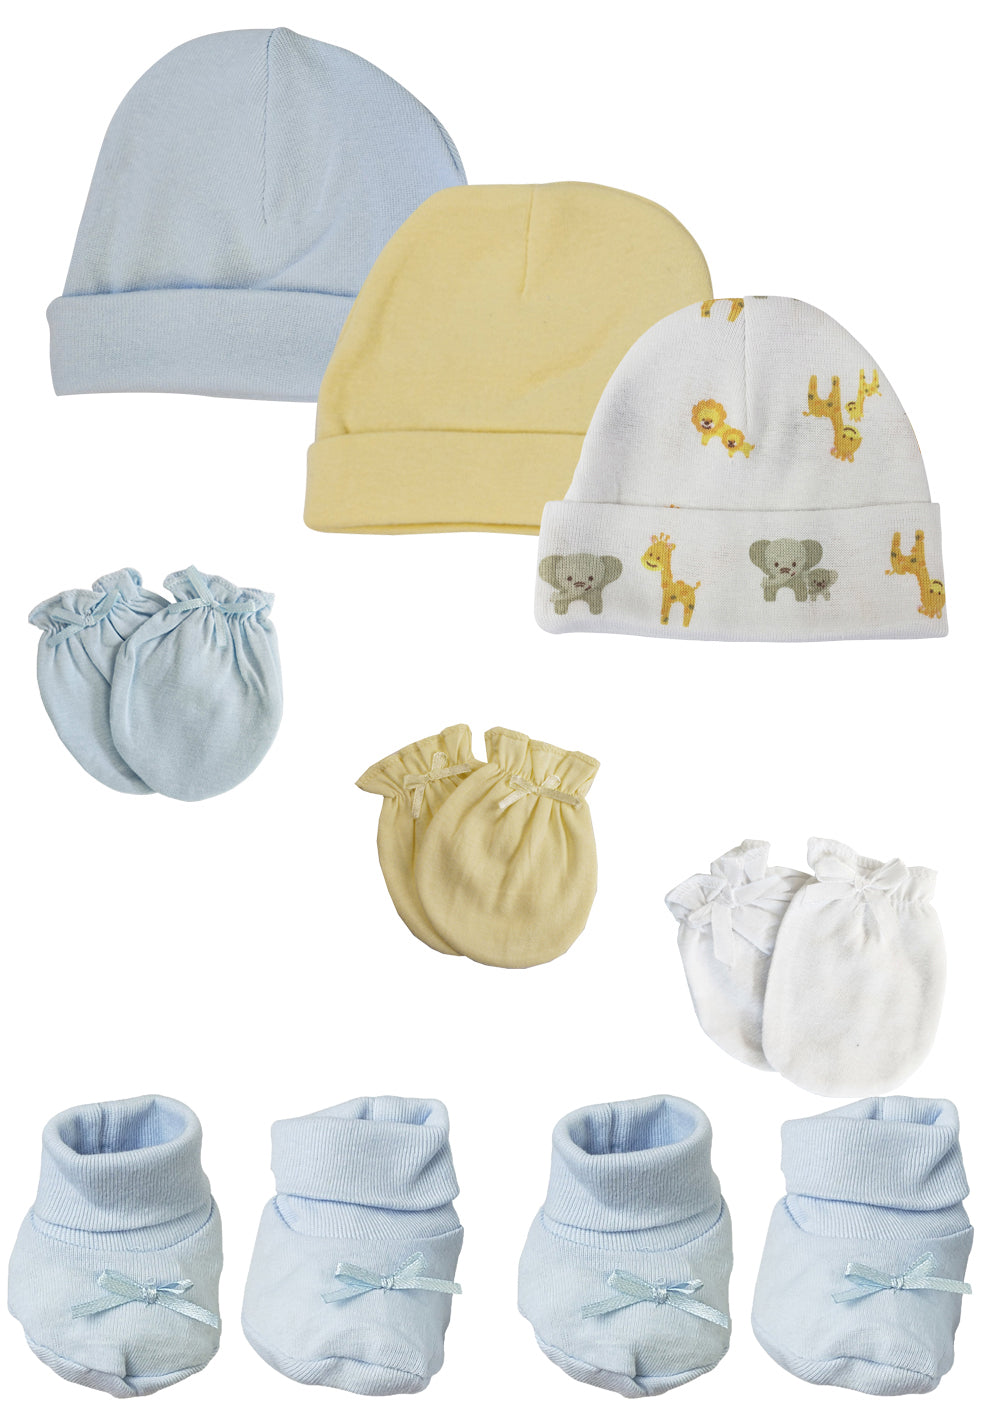 Preemie Baby Boy Caps with Infant Mittens and Booties - 8 Pack NC_0223